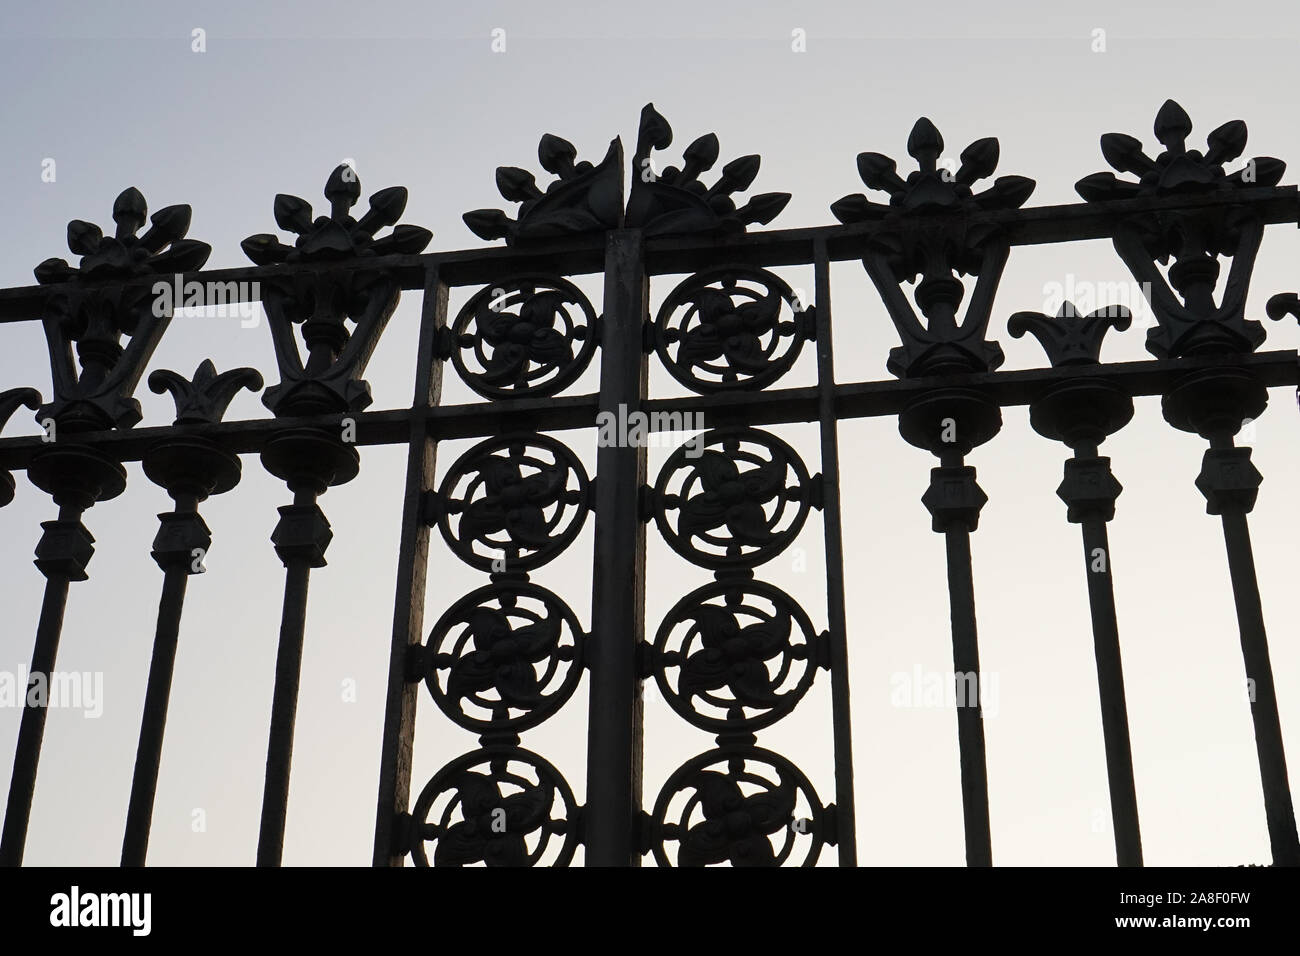 A silhouette image of a cast iron ornate gate Stock Photo